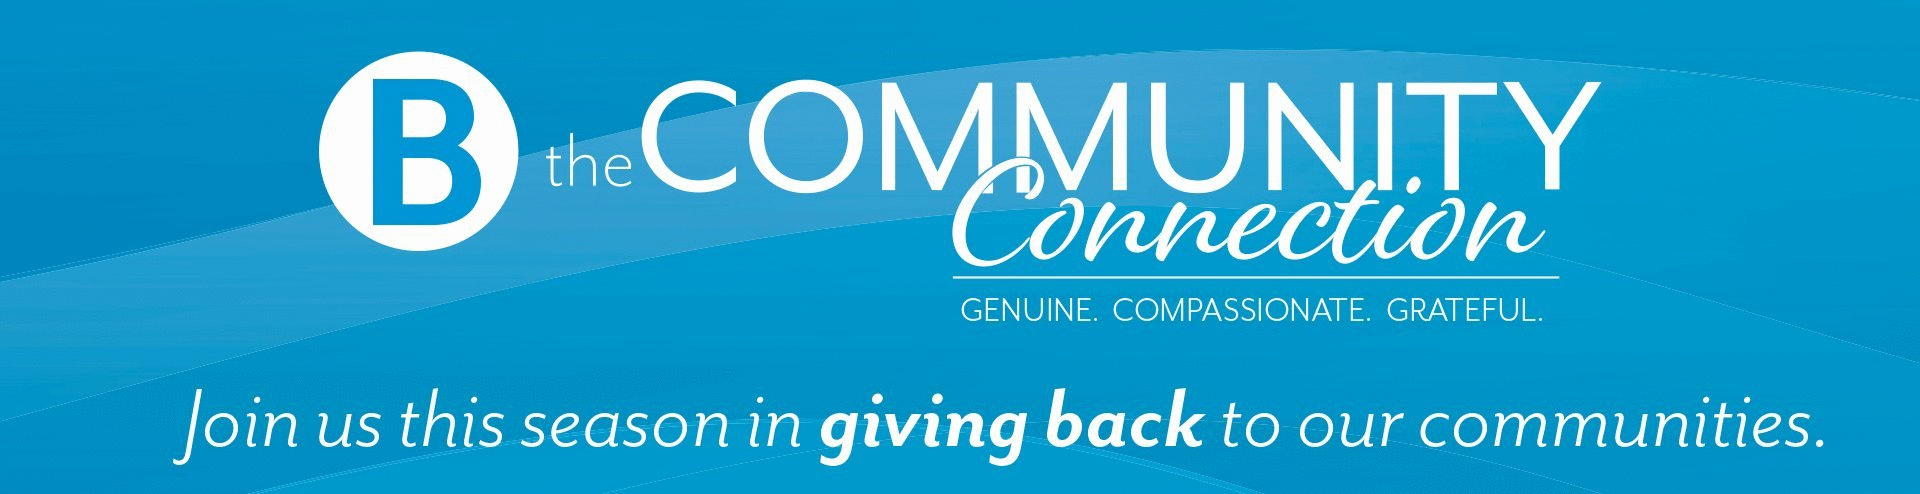 B the Community Connection | Genuine, Compassionate, Grateful | Join us this season in giving back to our communities.